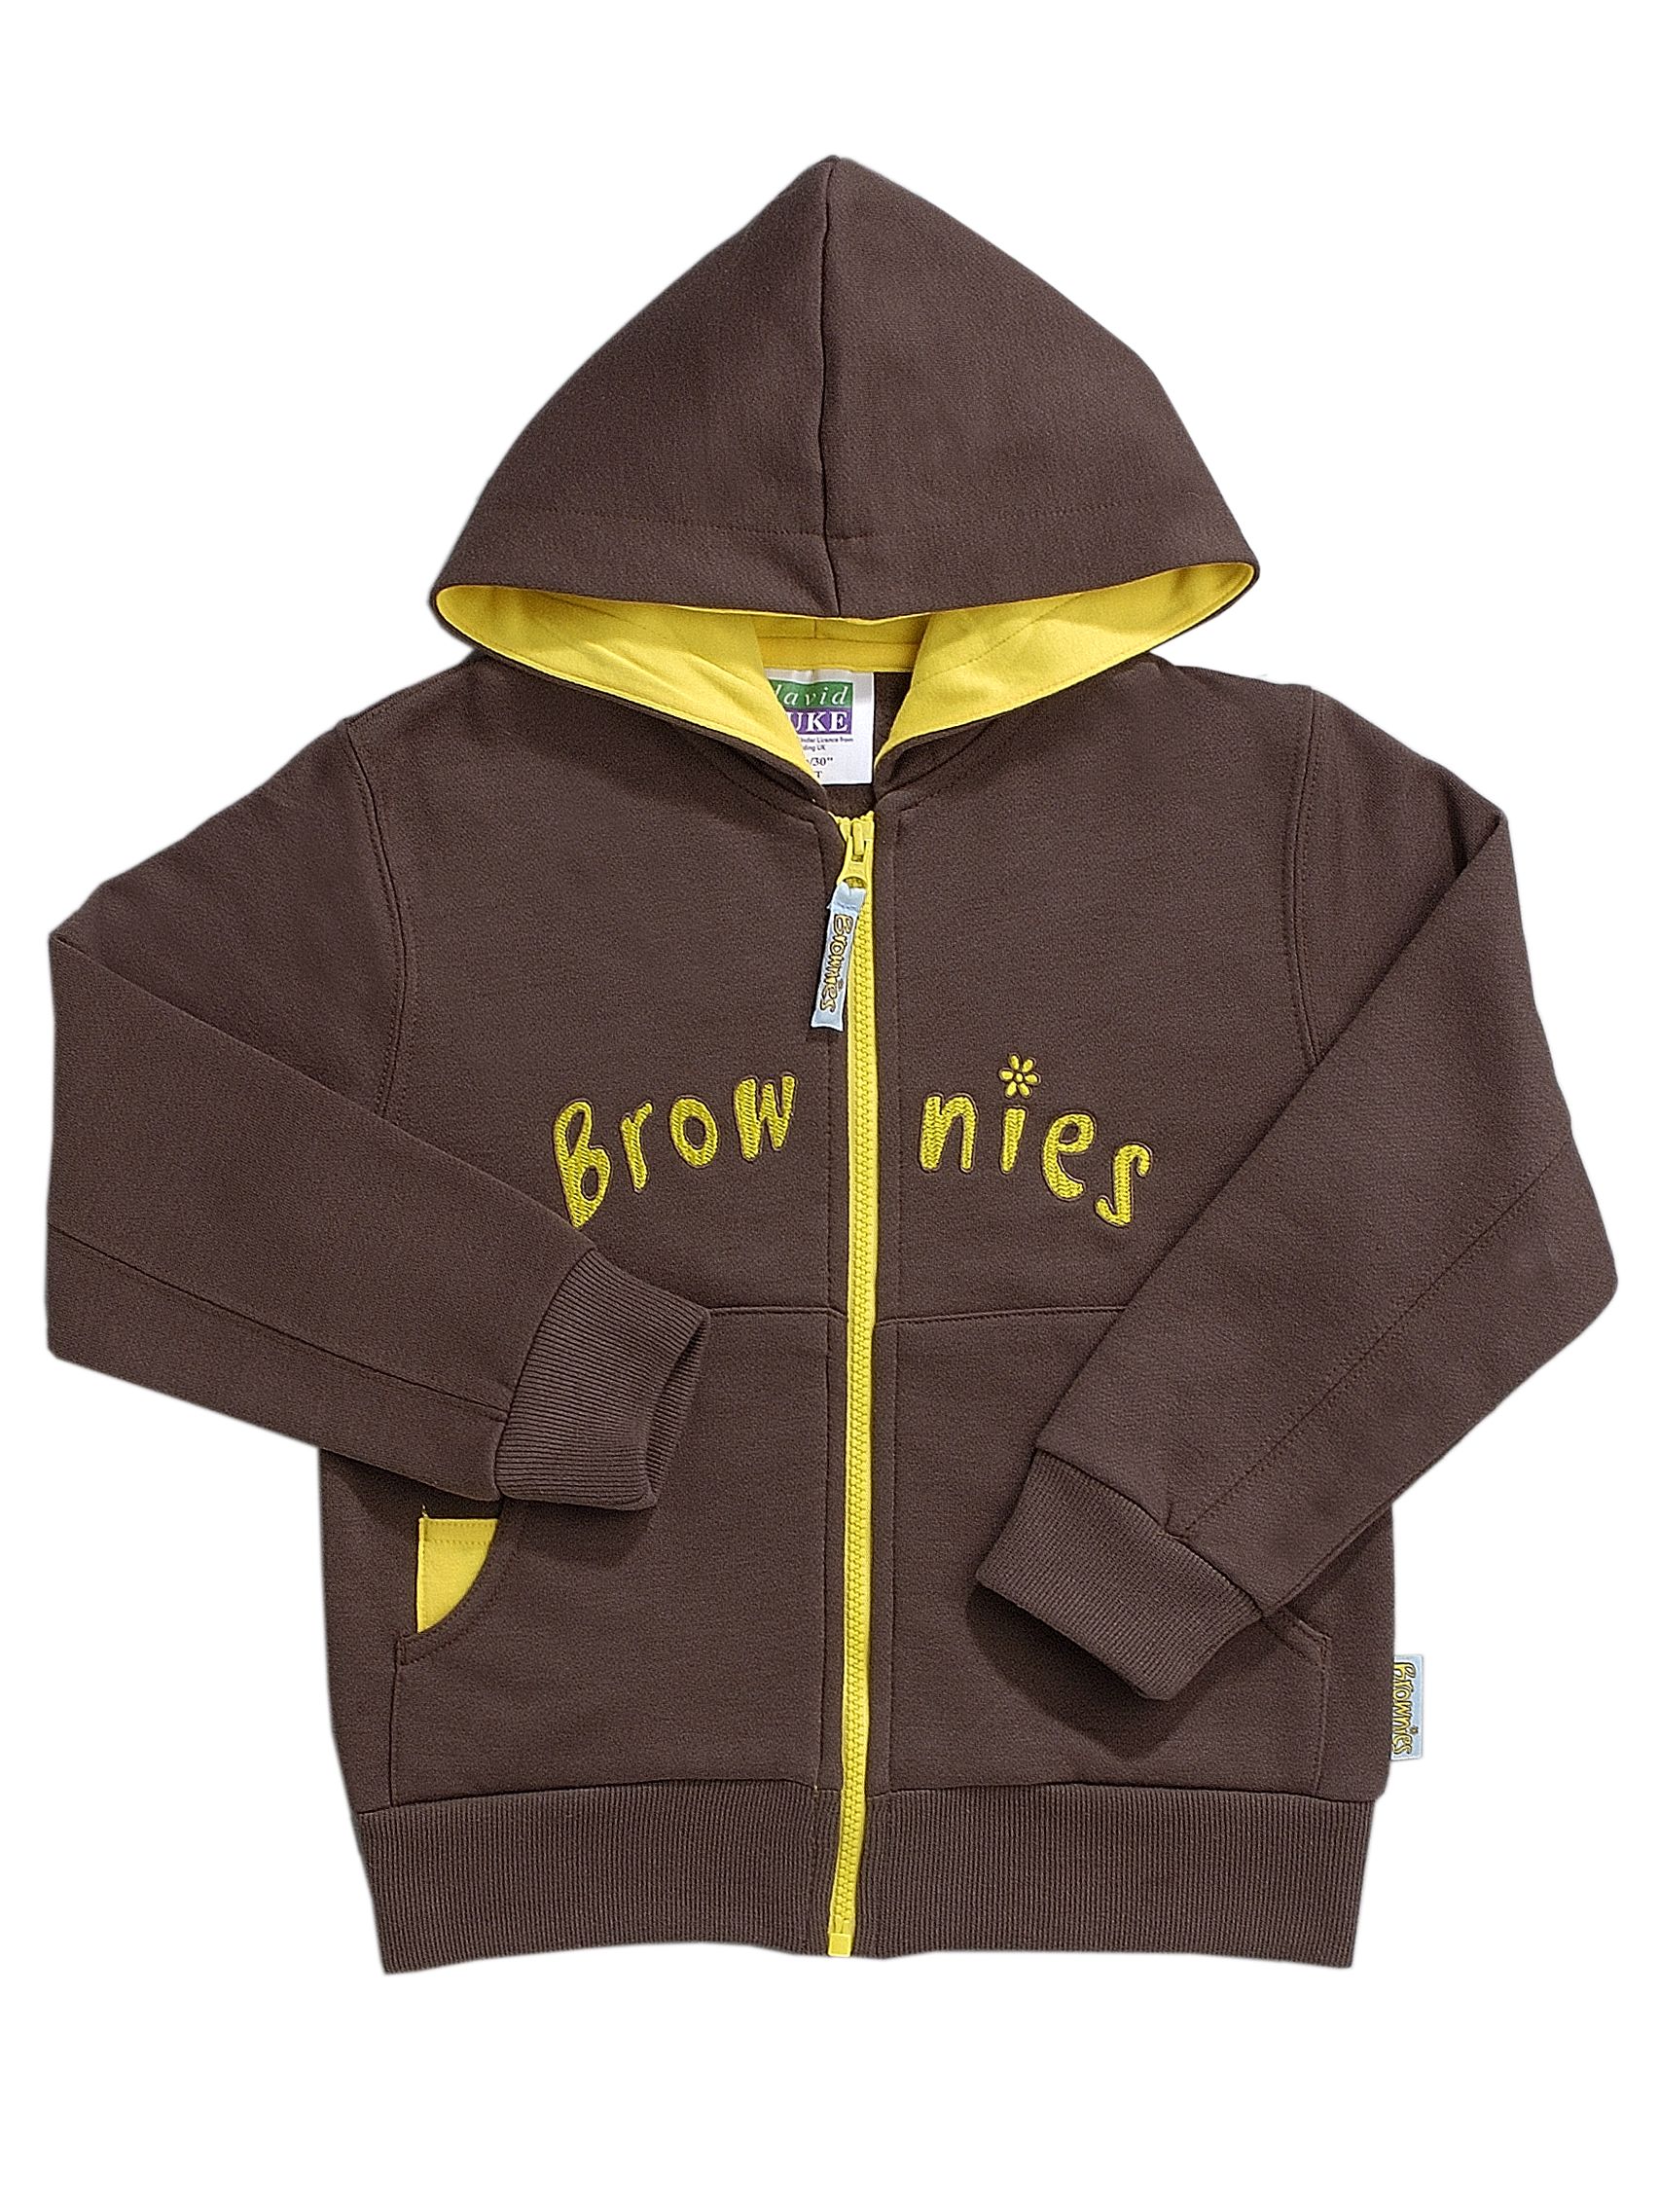 Unbranded Brownies Hooded Zipped Top, Chest 71cm